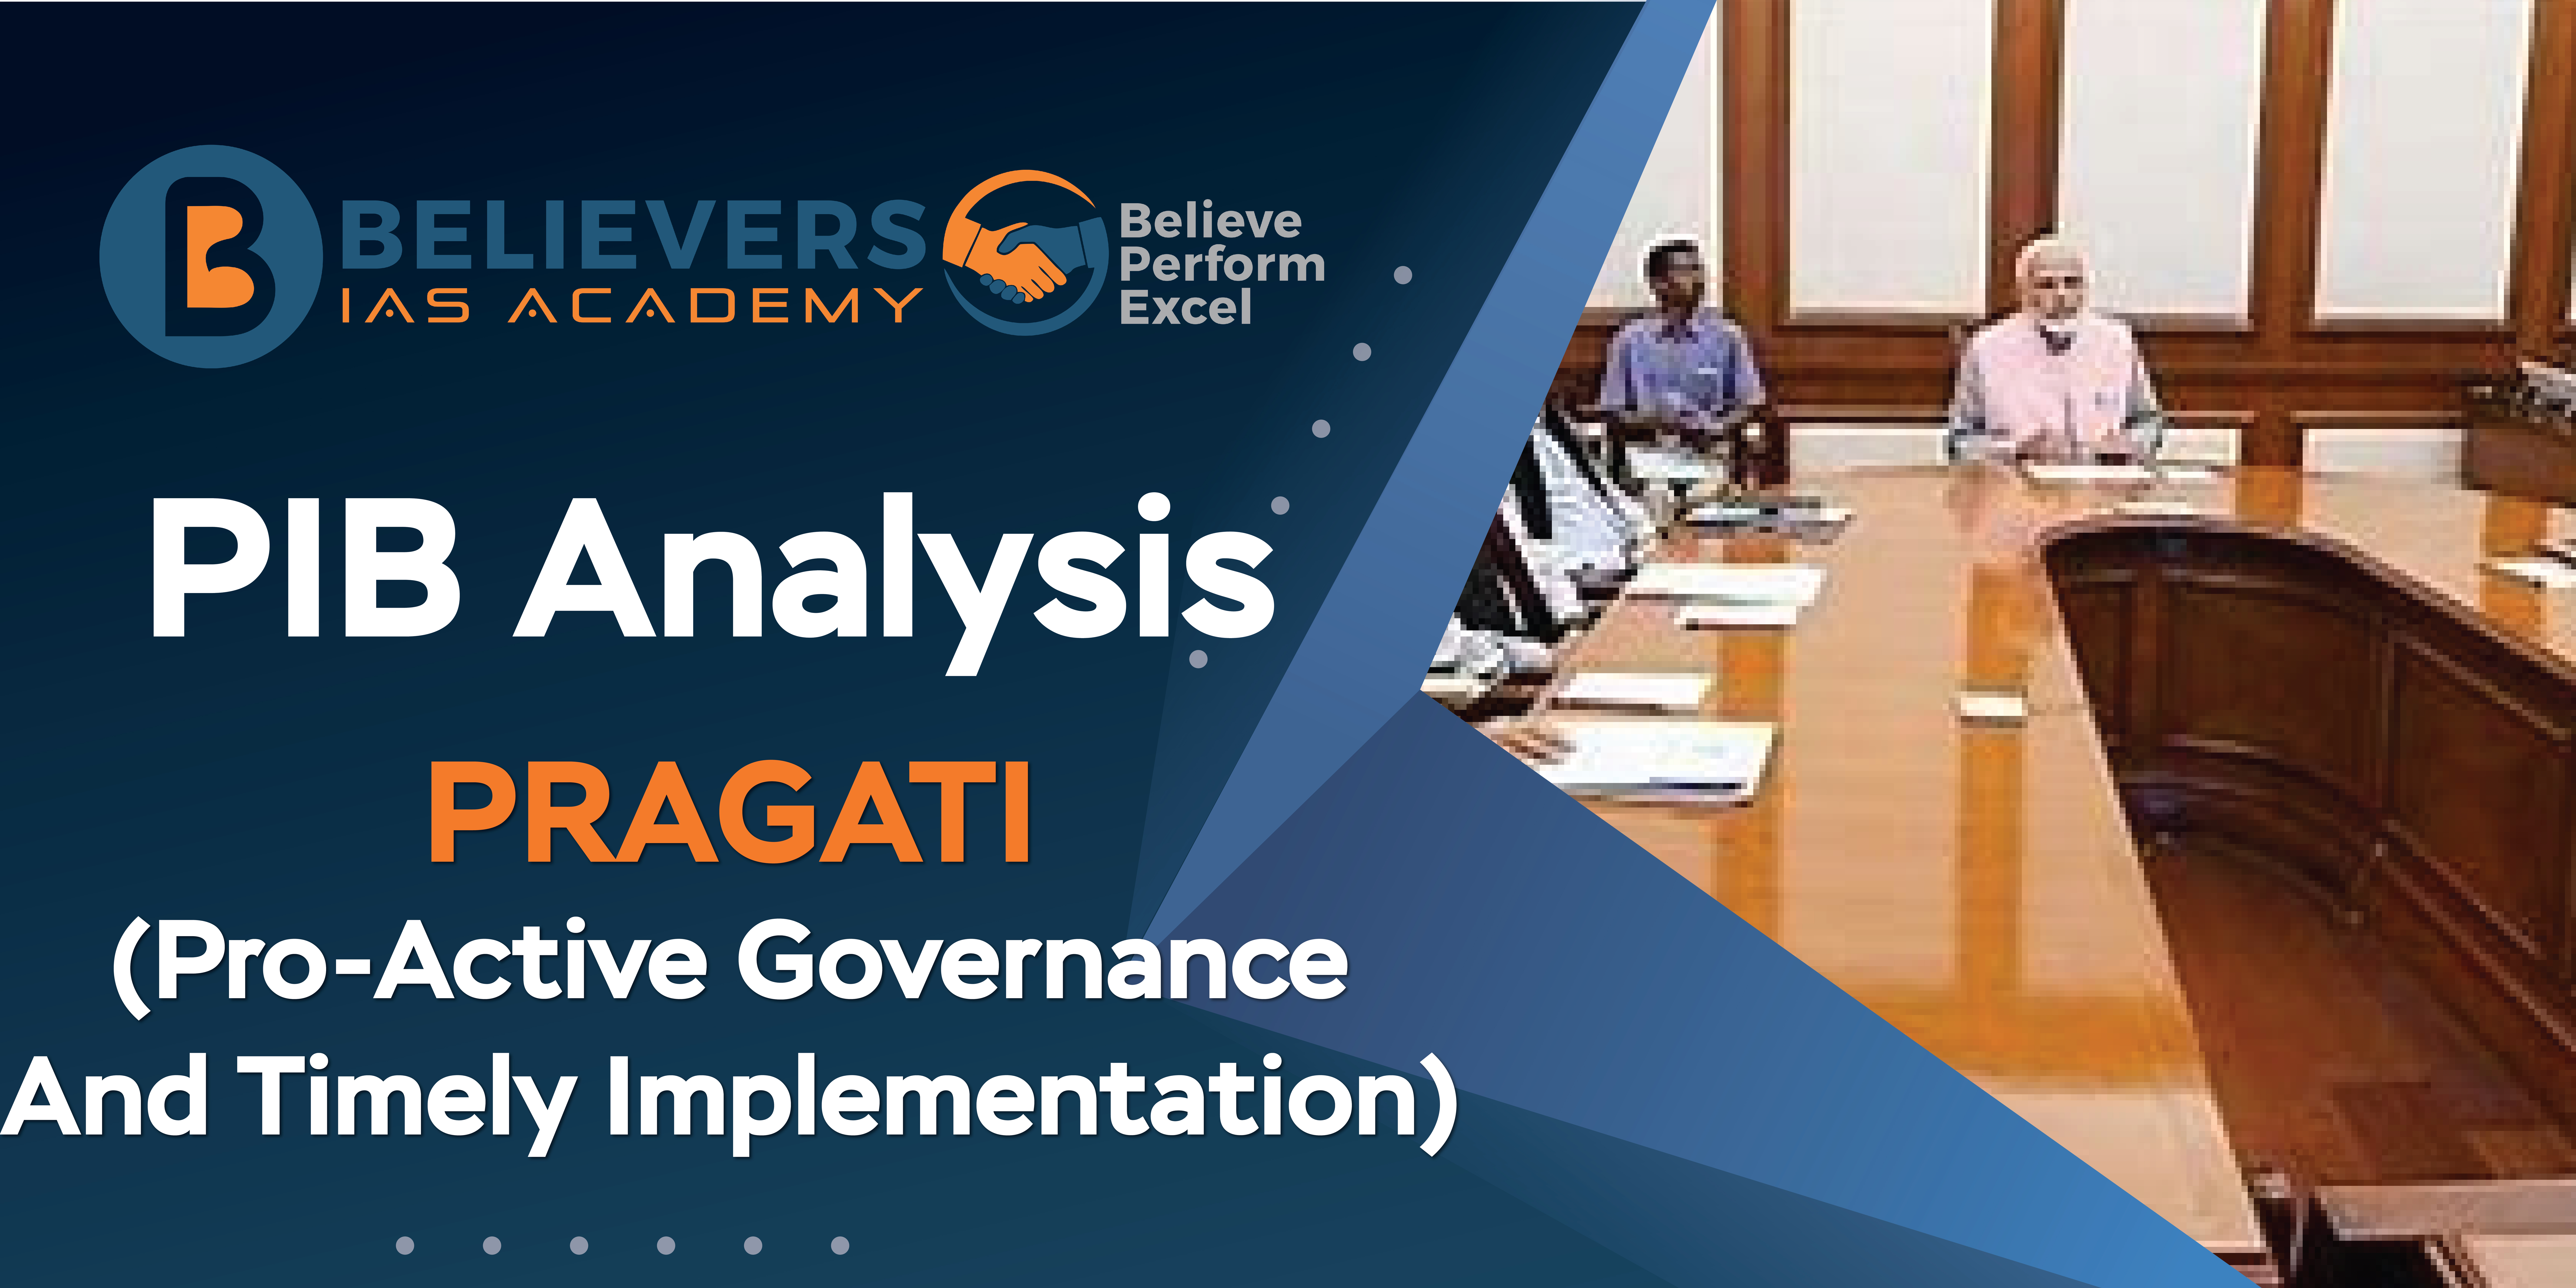 PRAGATI (Pro-Active Governance And Timely Implementation)